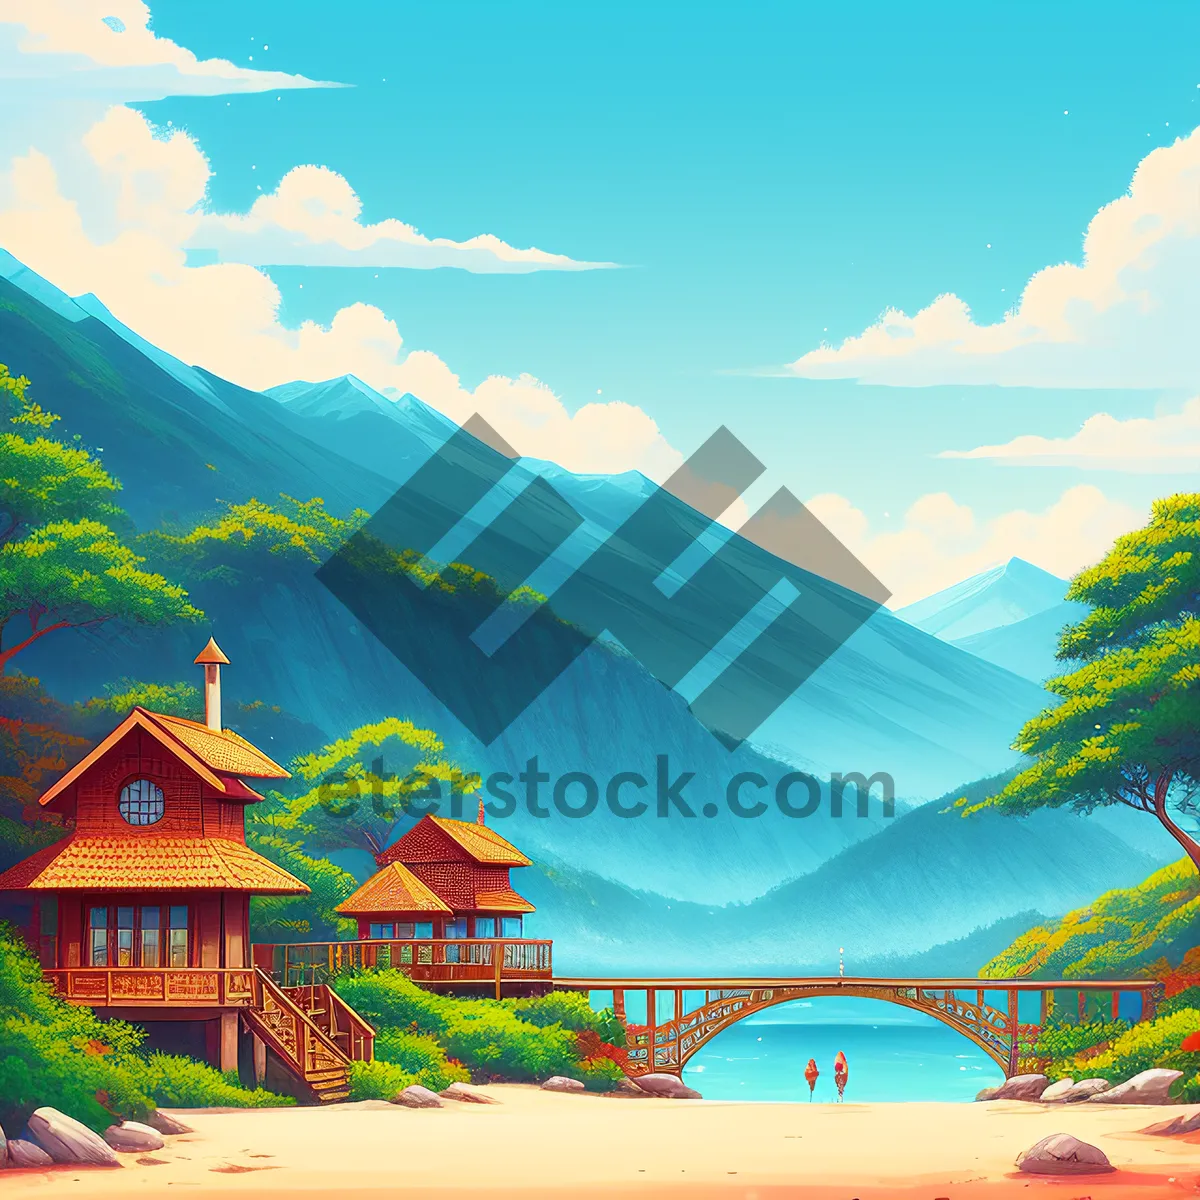 Picture of Island Paradise: Serene Summer Landscape with Resort and Sky